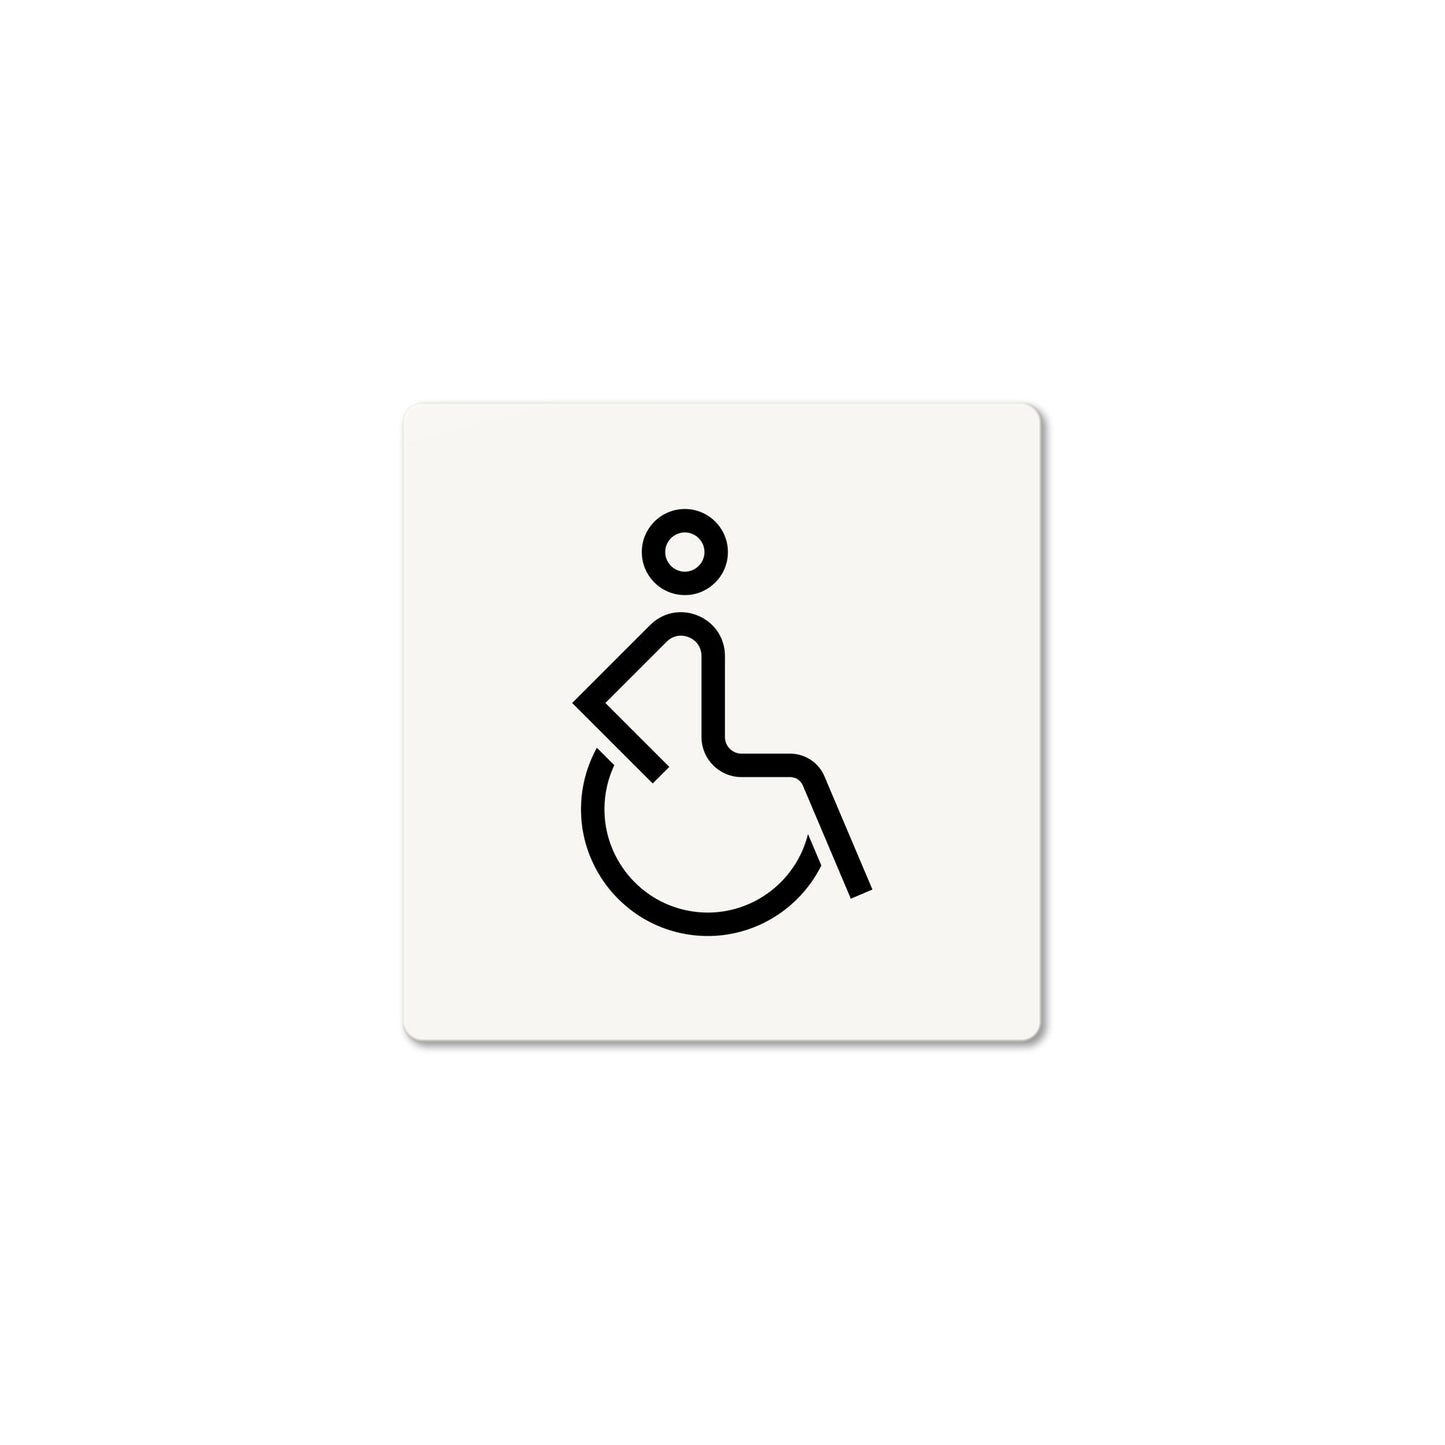 Accessible (Pictogram)